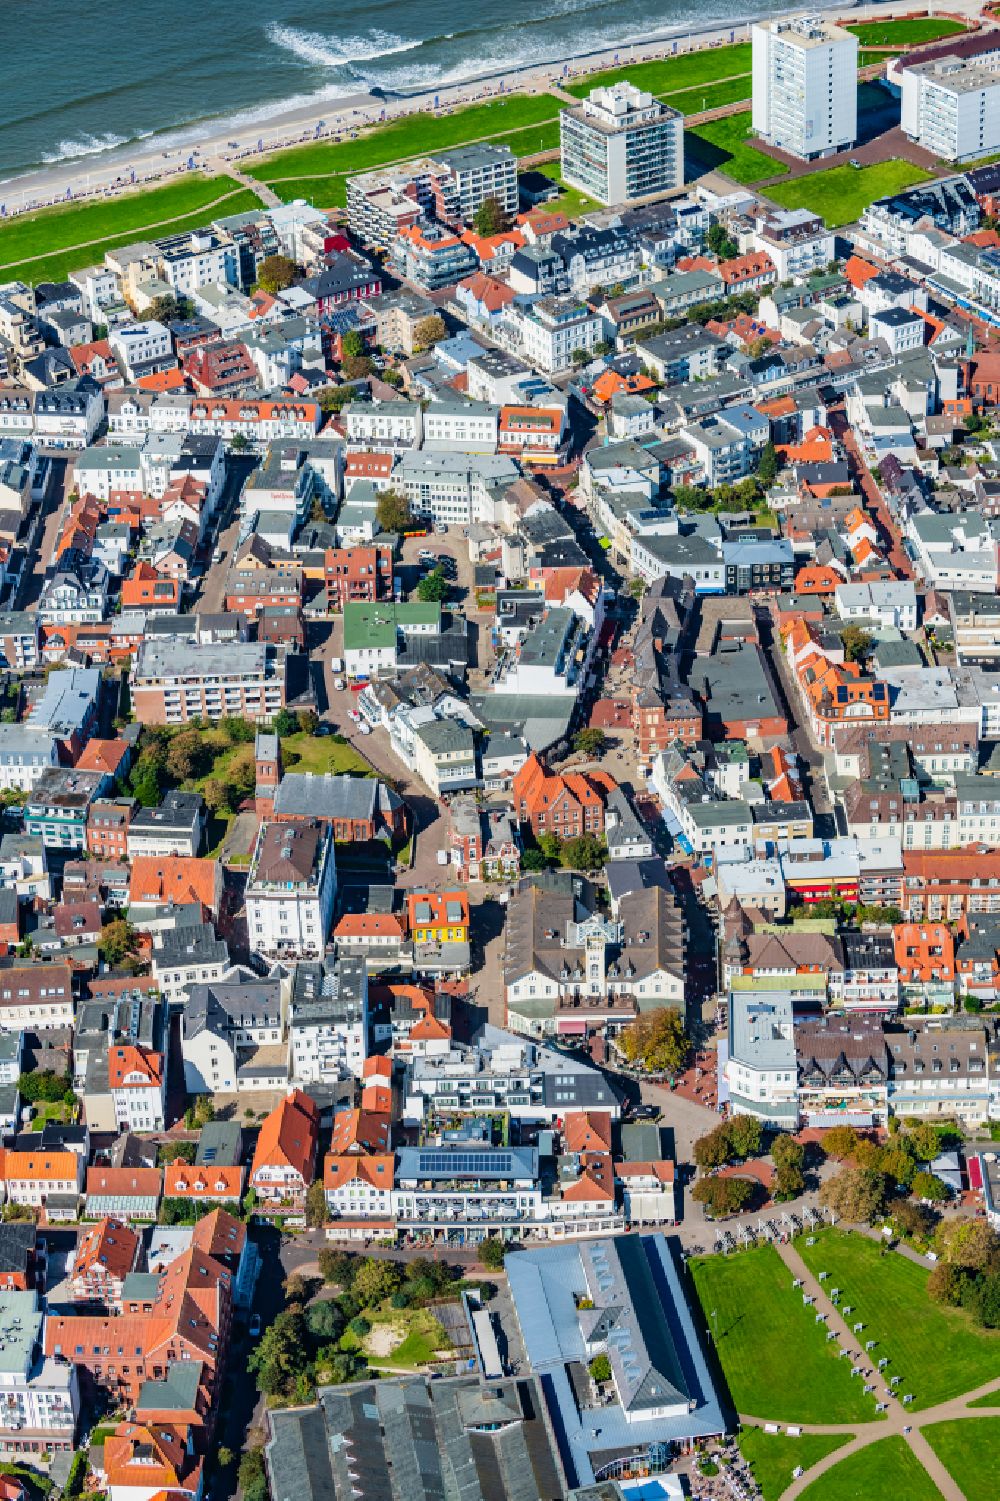 Aerial image Norderney - City center in the inner city area on the island of Norderney in the state of Lower Saxony, Germany